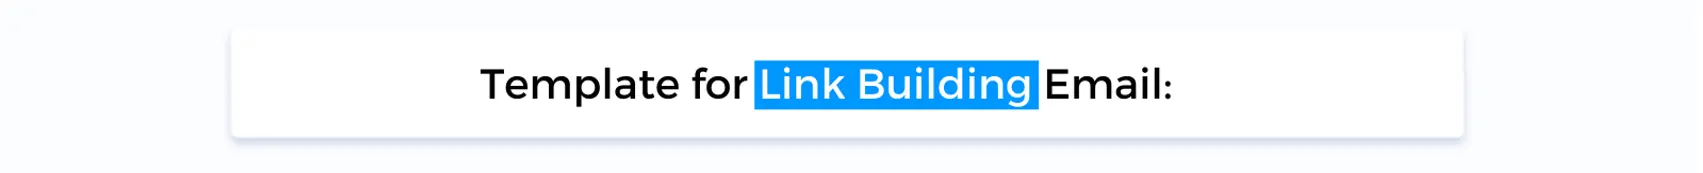 Template for Link Building Email